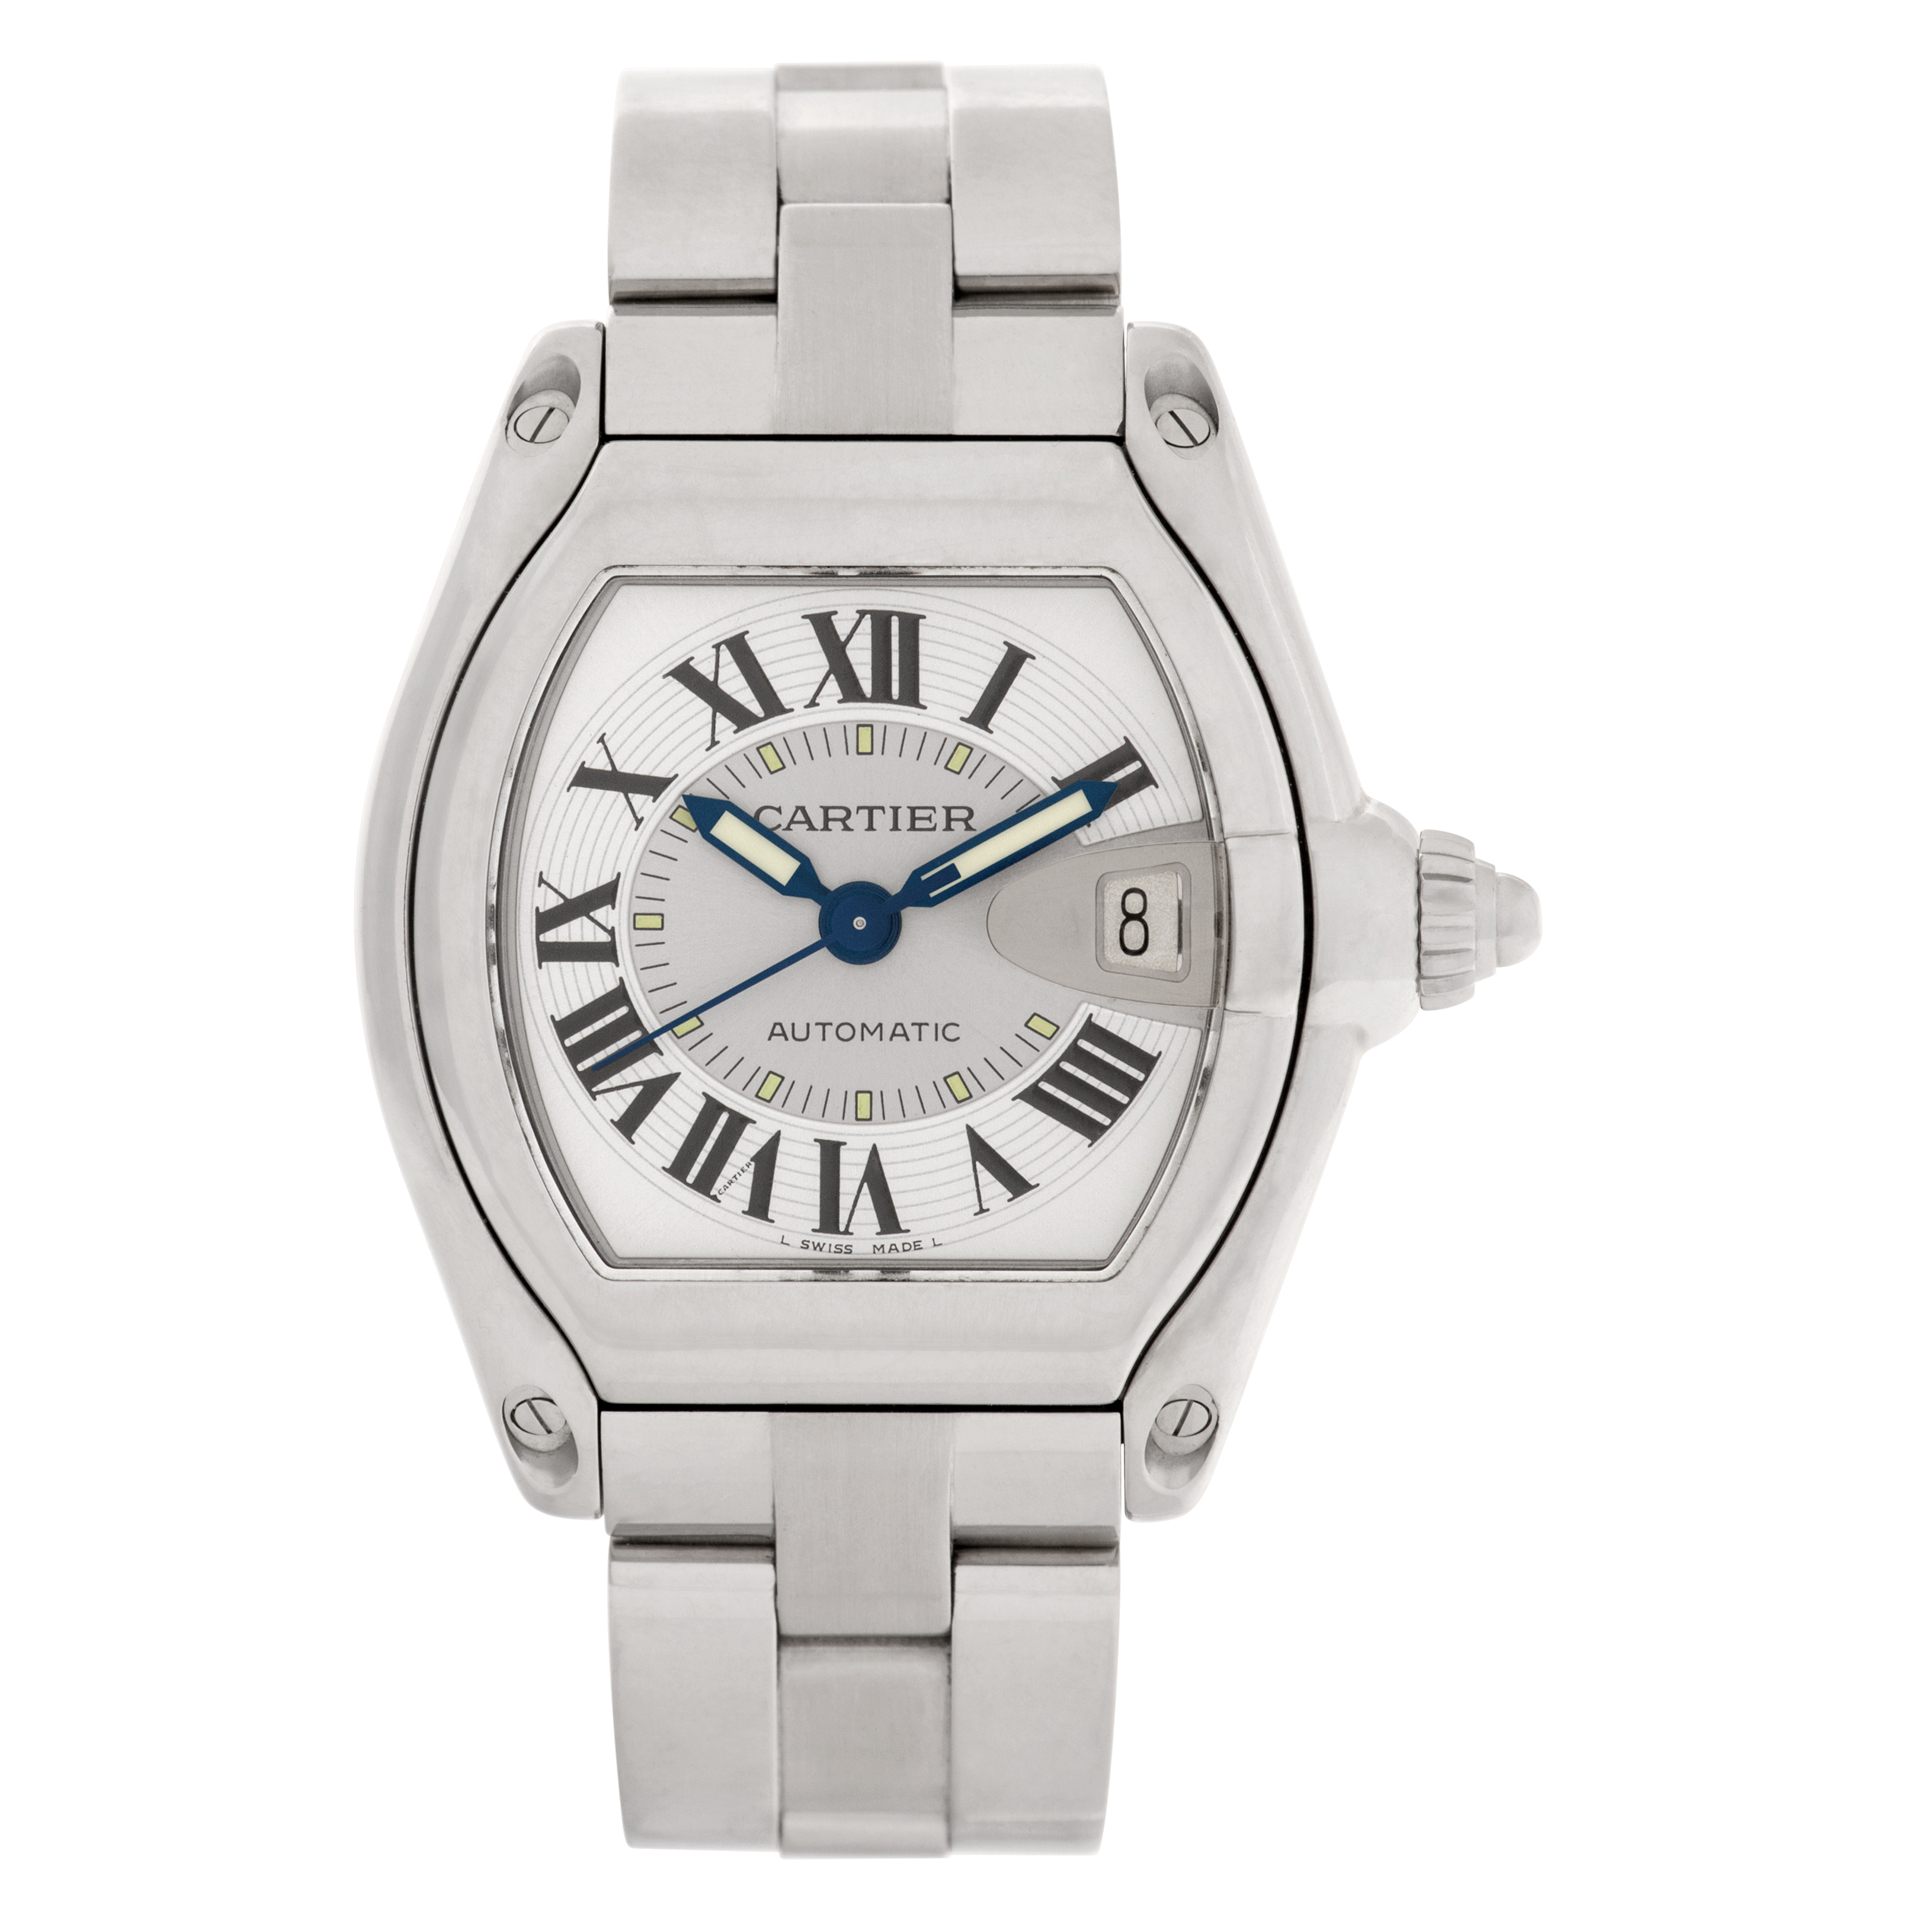 Cartier Roadster 37mm W62000V3 (Watches)